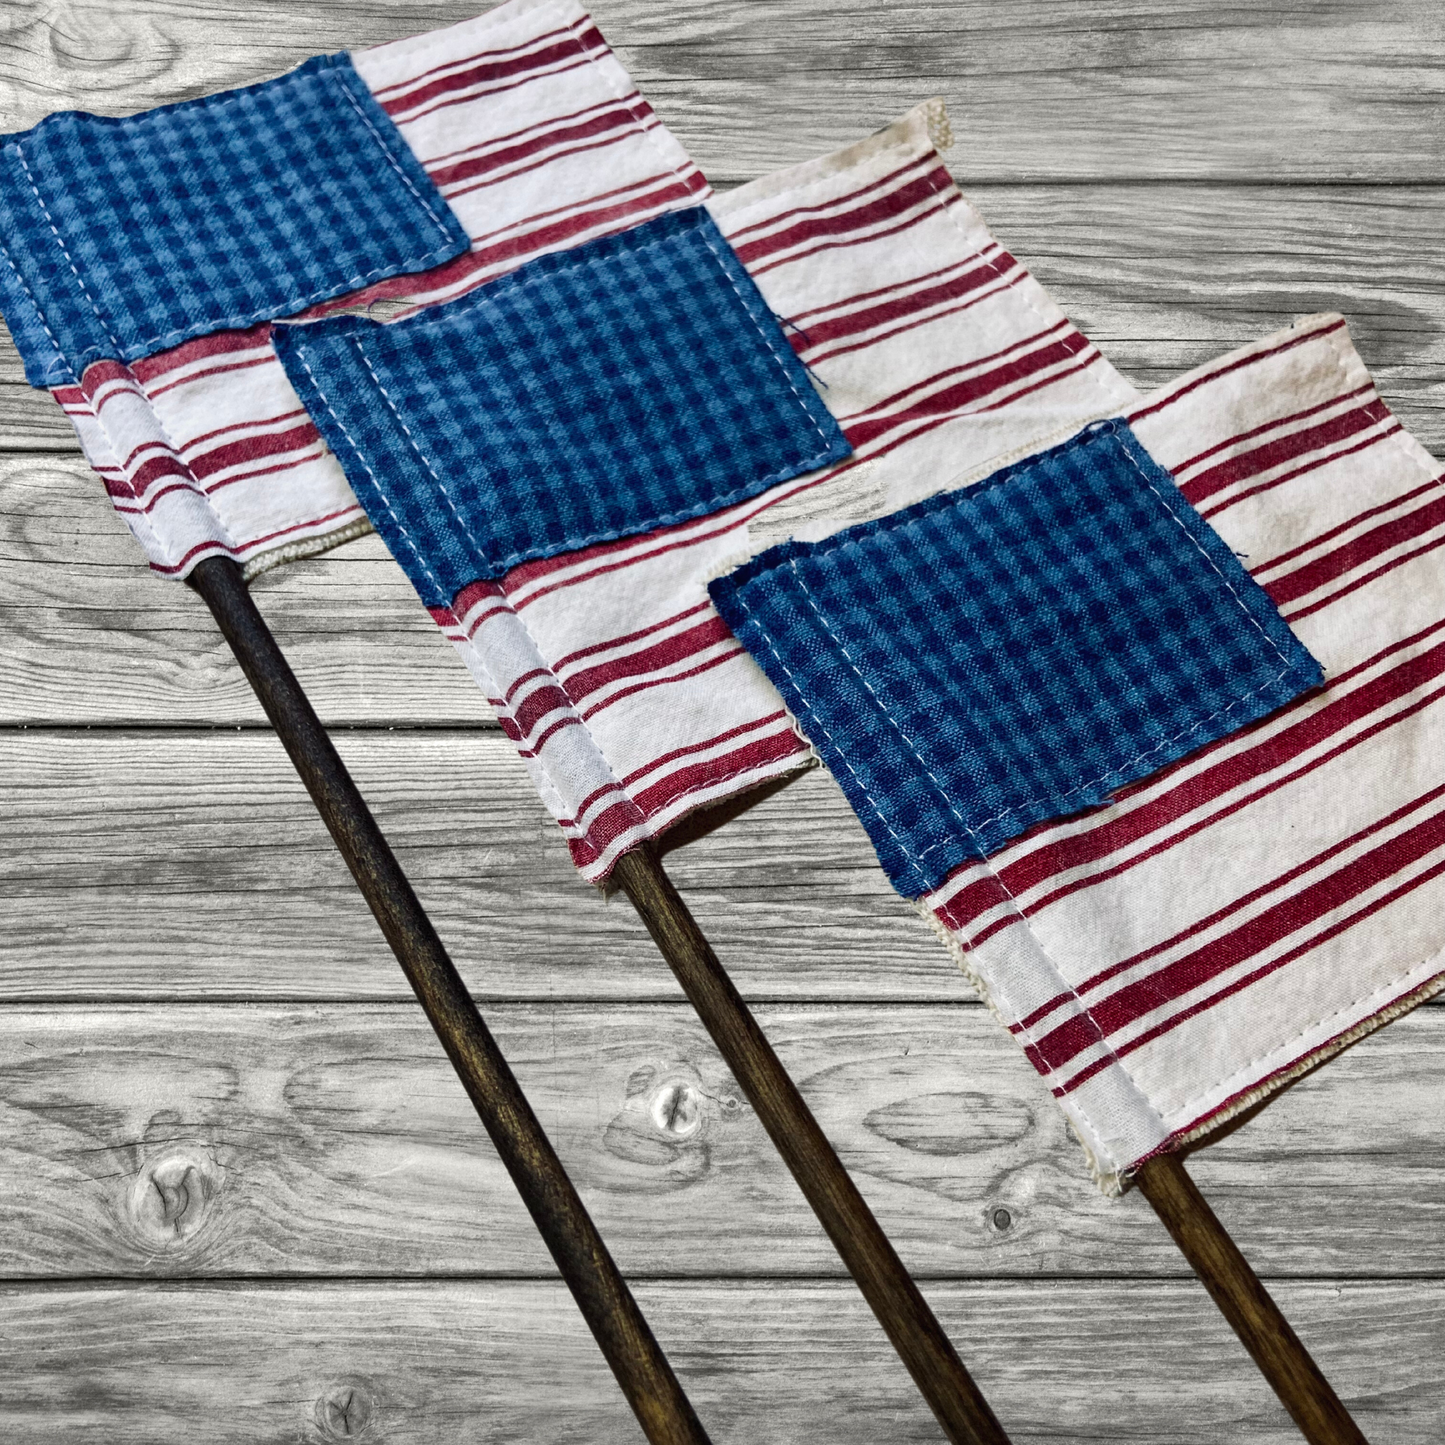 Vintage Fabric Flag on Rustic Stained Stick for 4th of July or Patriotic Decor